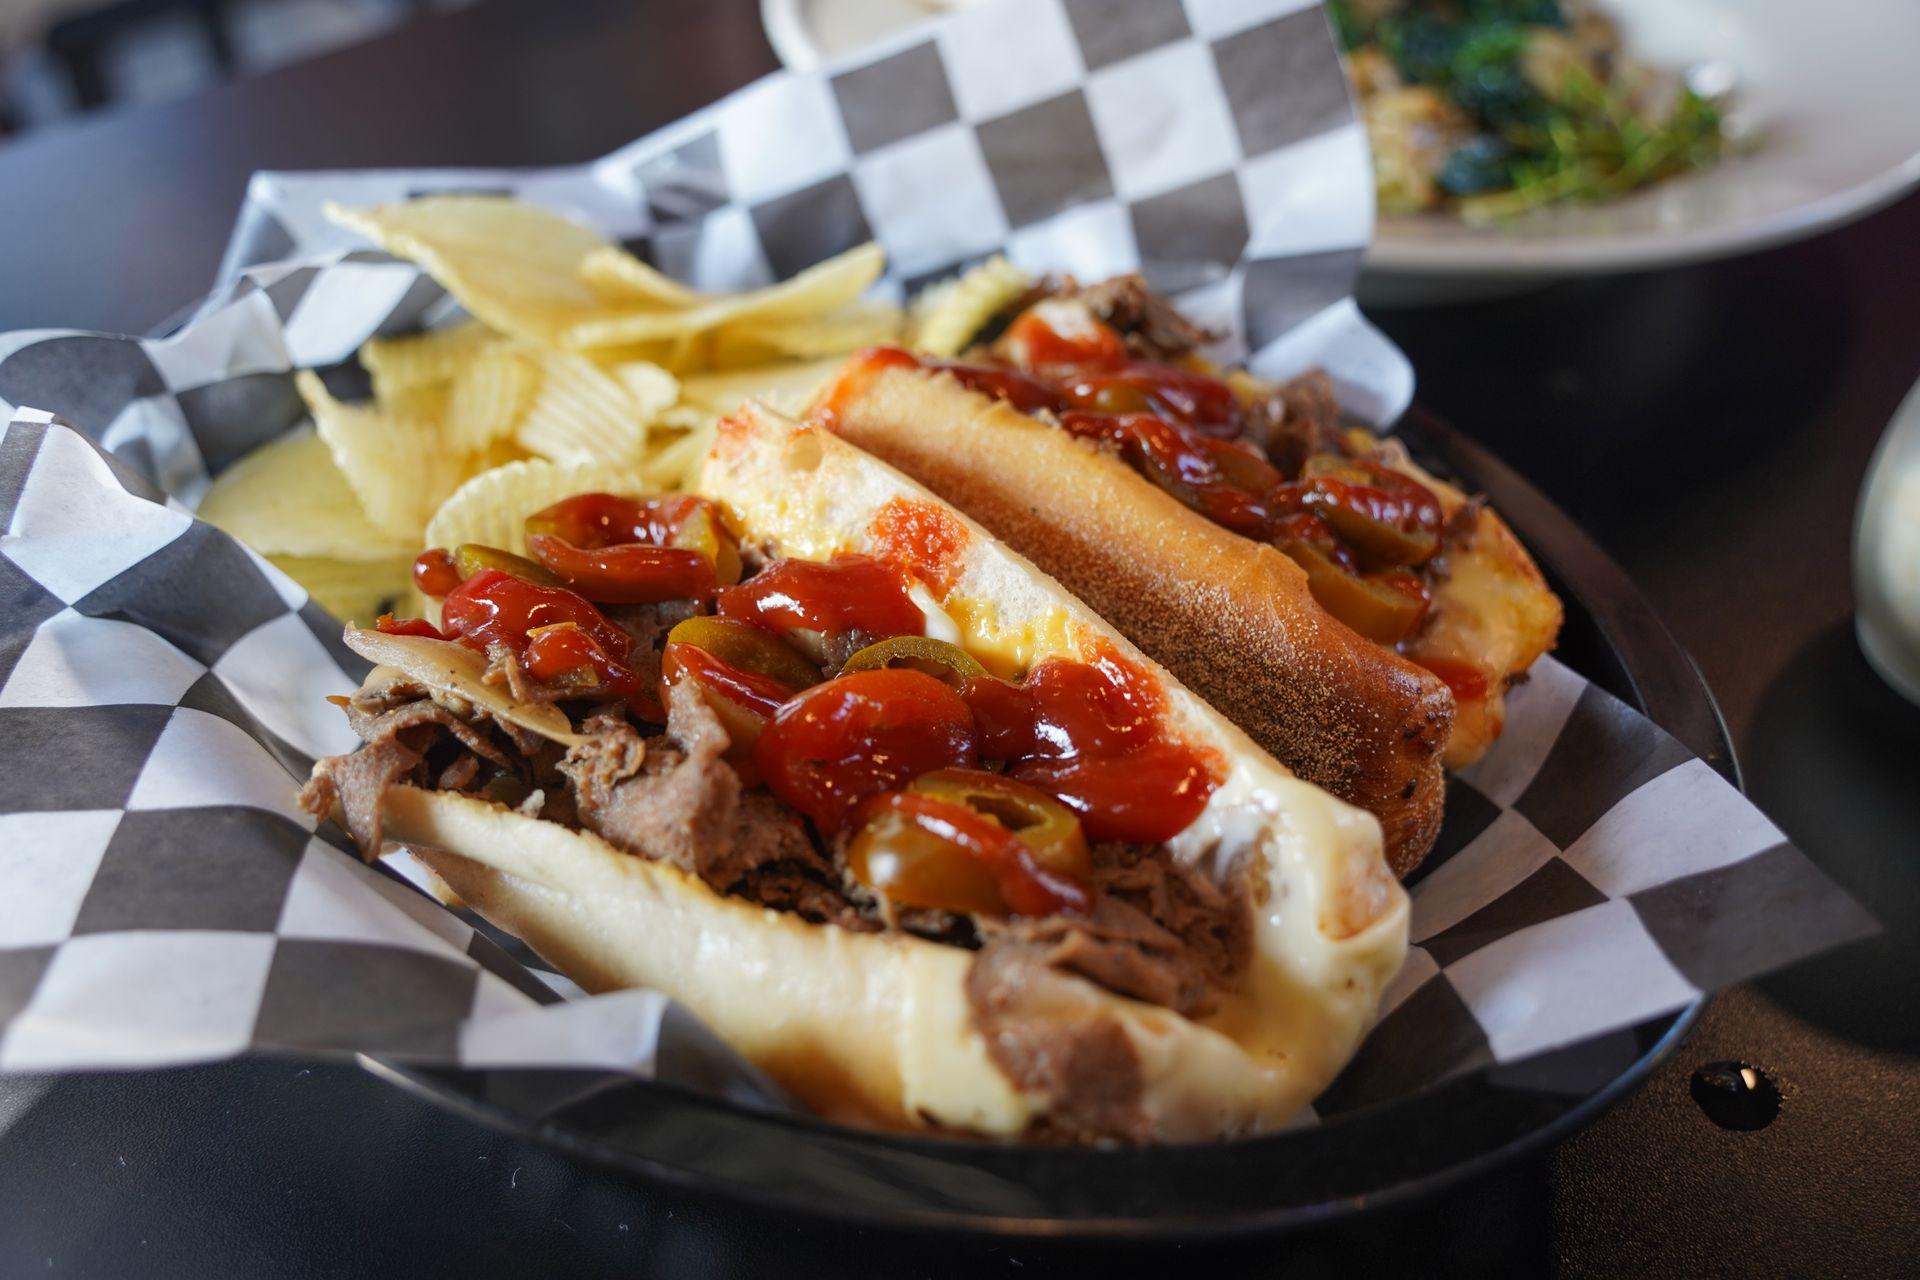 A Philly Cheesesteak from The We Are Inn